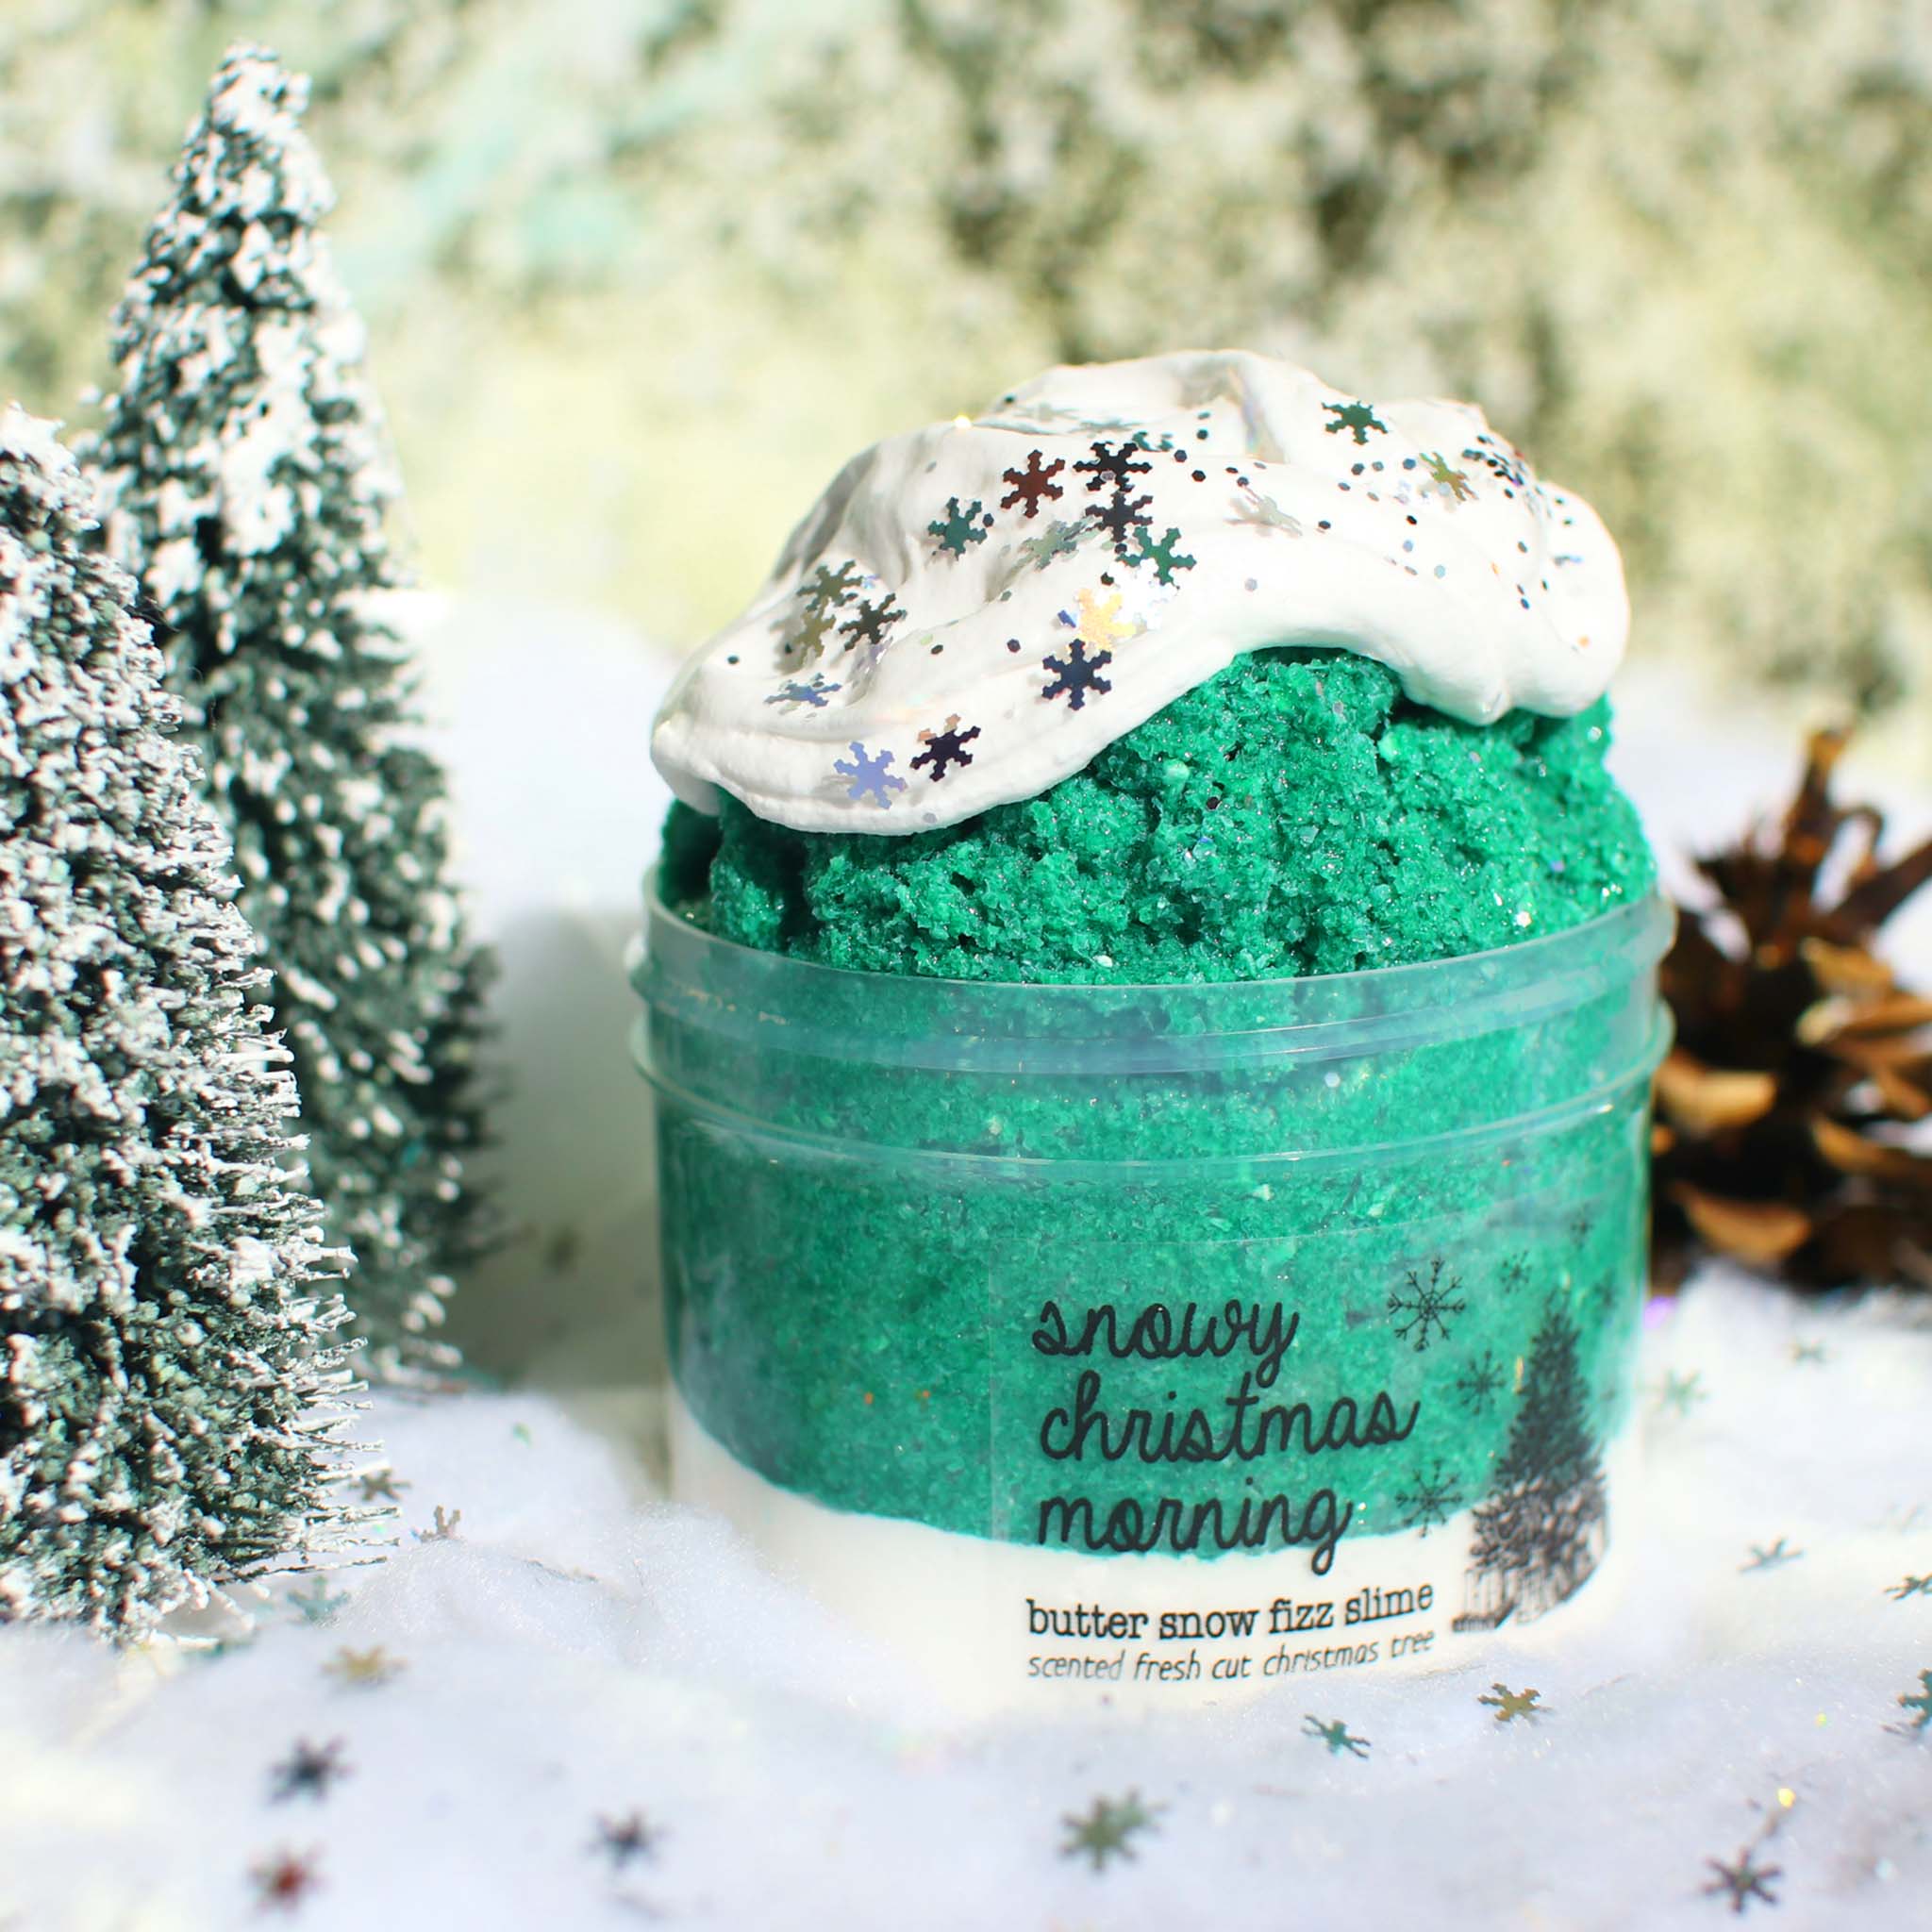 Snowy Christmas Morning Christmas Slime Gift For Kids Green White Tree Scented Clay Creamy Crunchy Butter Snow Fizz Slime Fantasies Shop 9oz Front View Decoration Side View